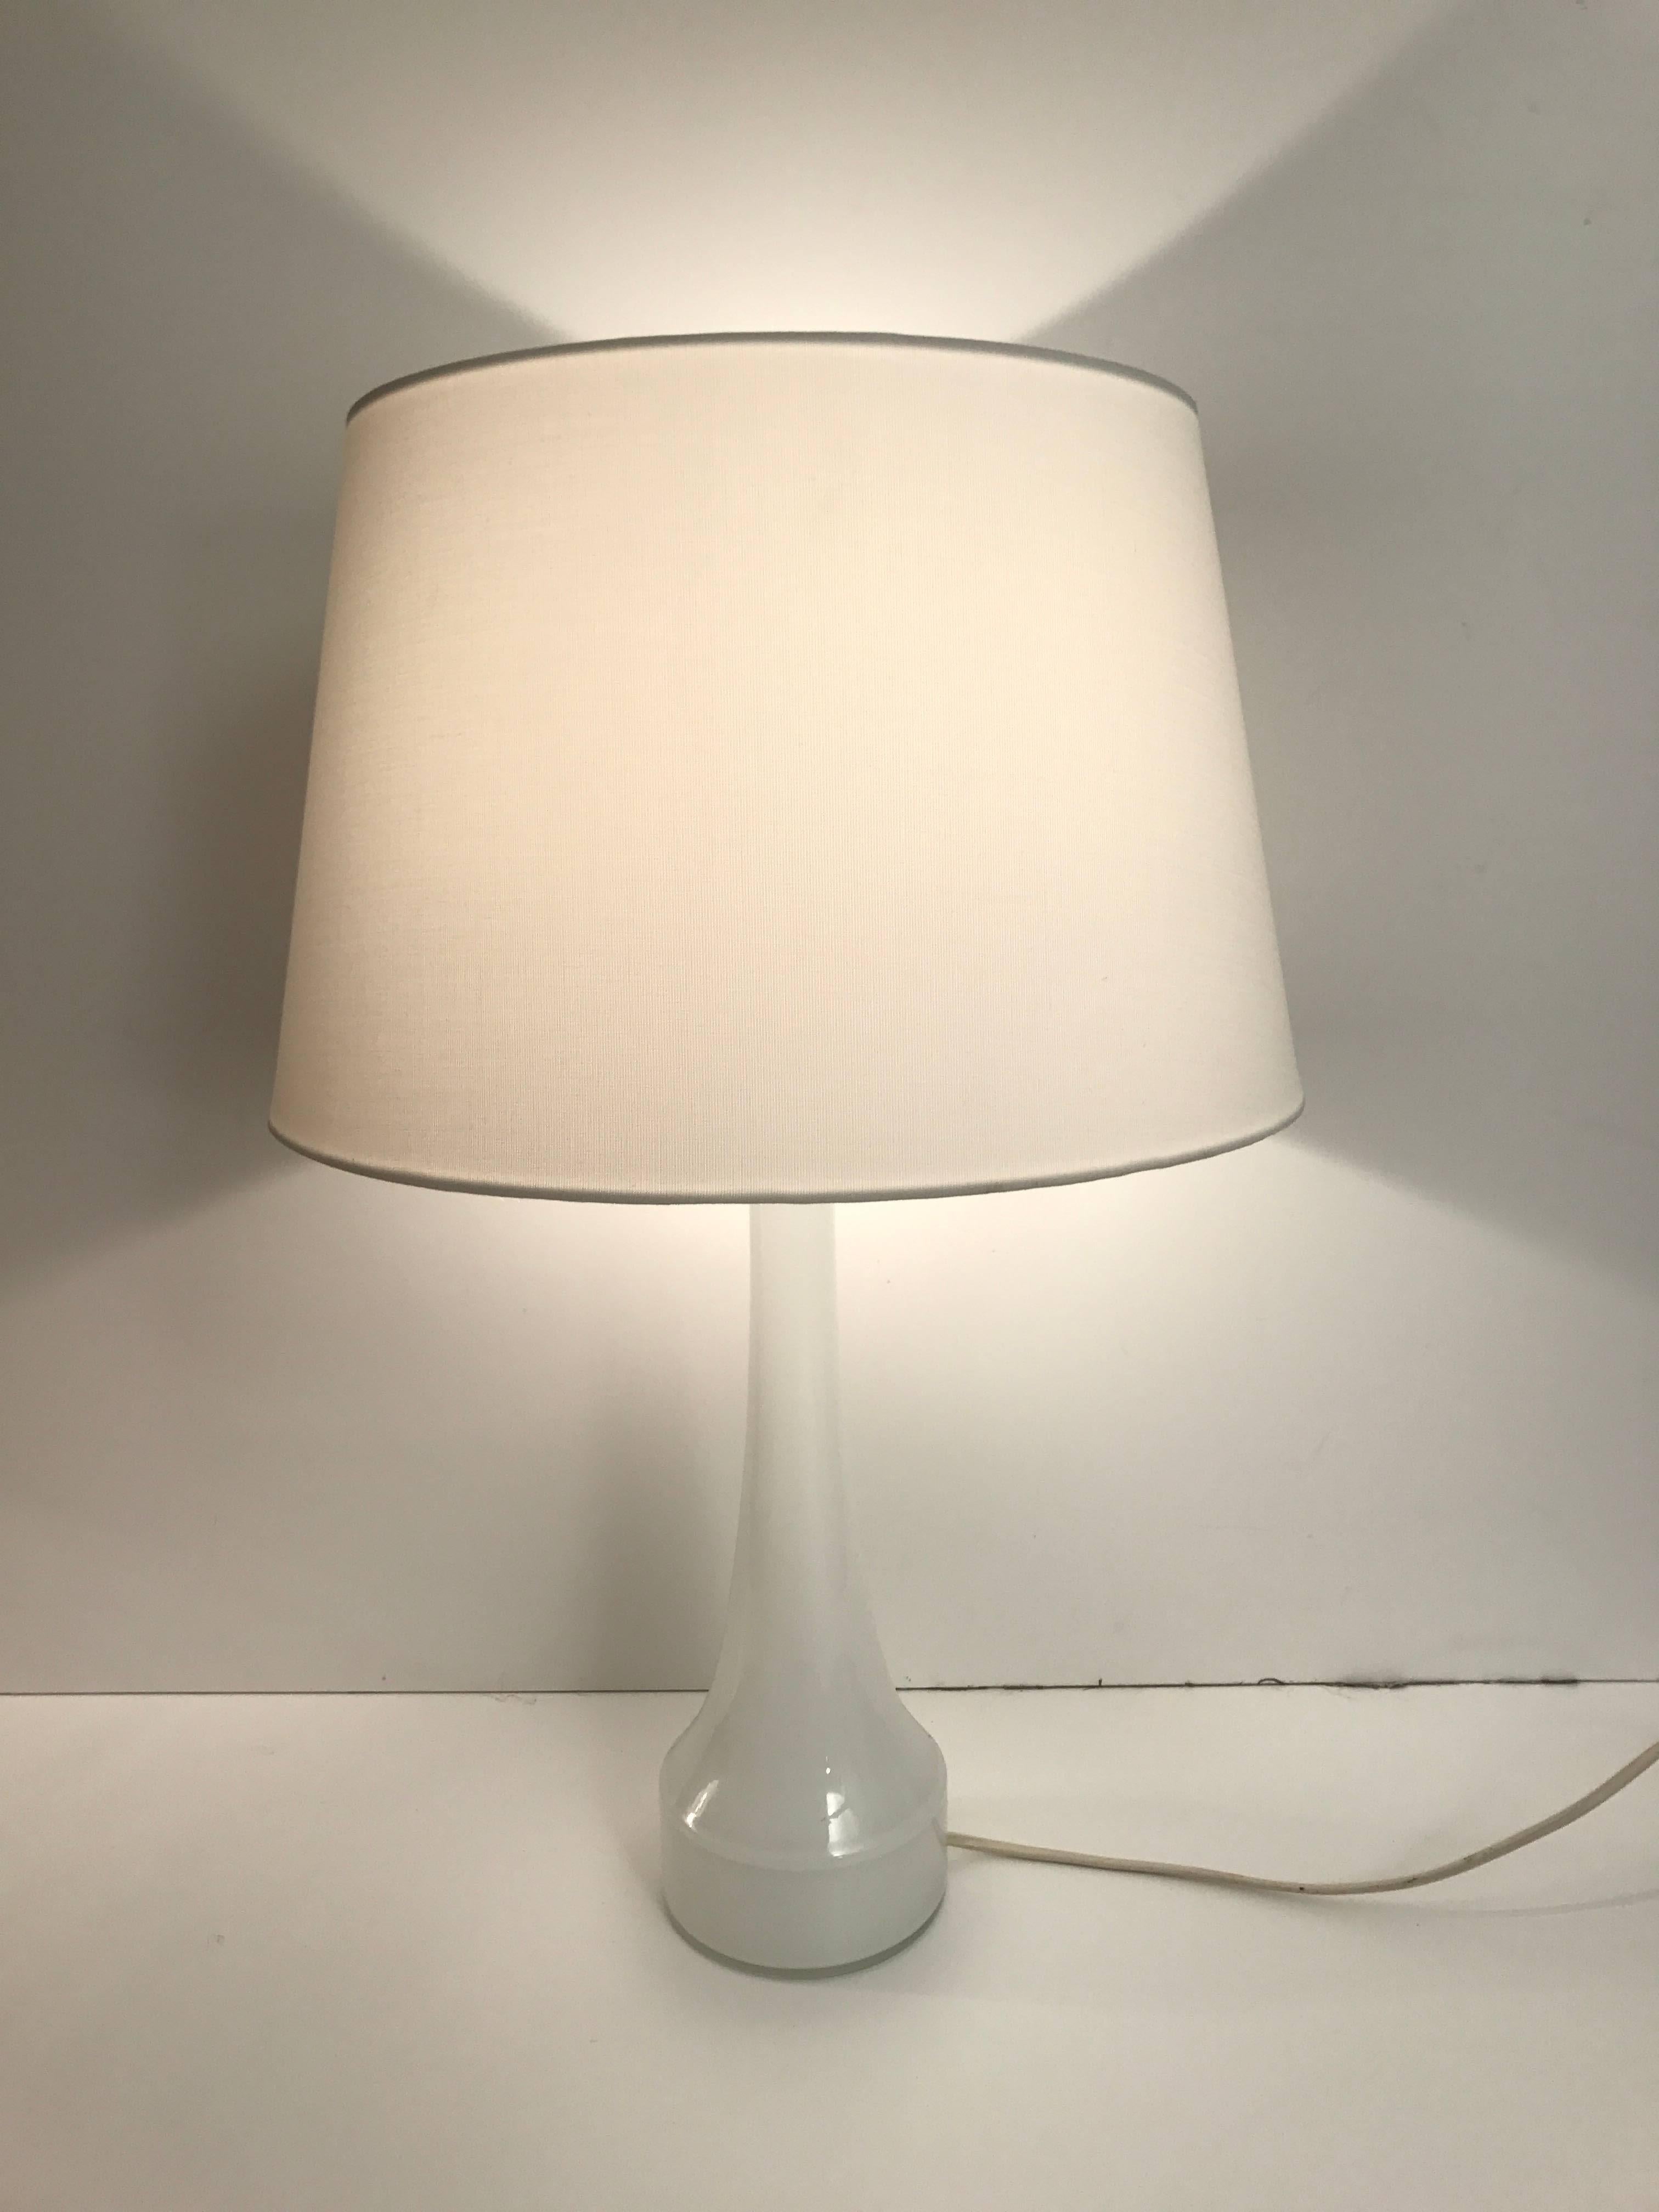 Pair of 1955 white Bergboms/Holmegaard opaline glass table lamps.
Fantastic pair of white oplaine glass table lamps designed by Bergboms and manufactured by Holmegaard in Denmark. 
The pair is in a fantastic condition where new cords has been